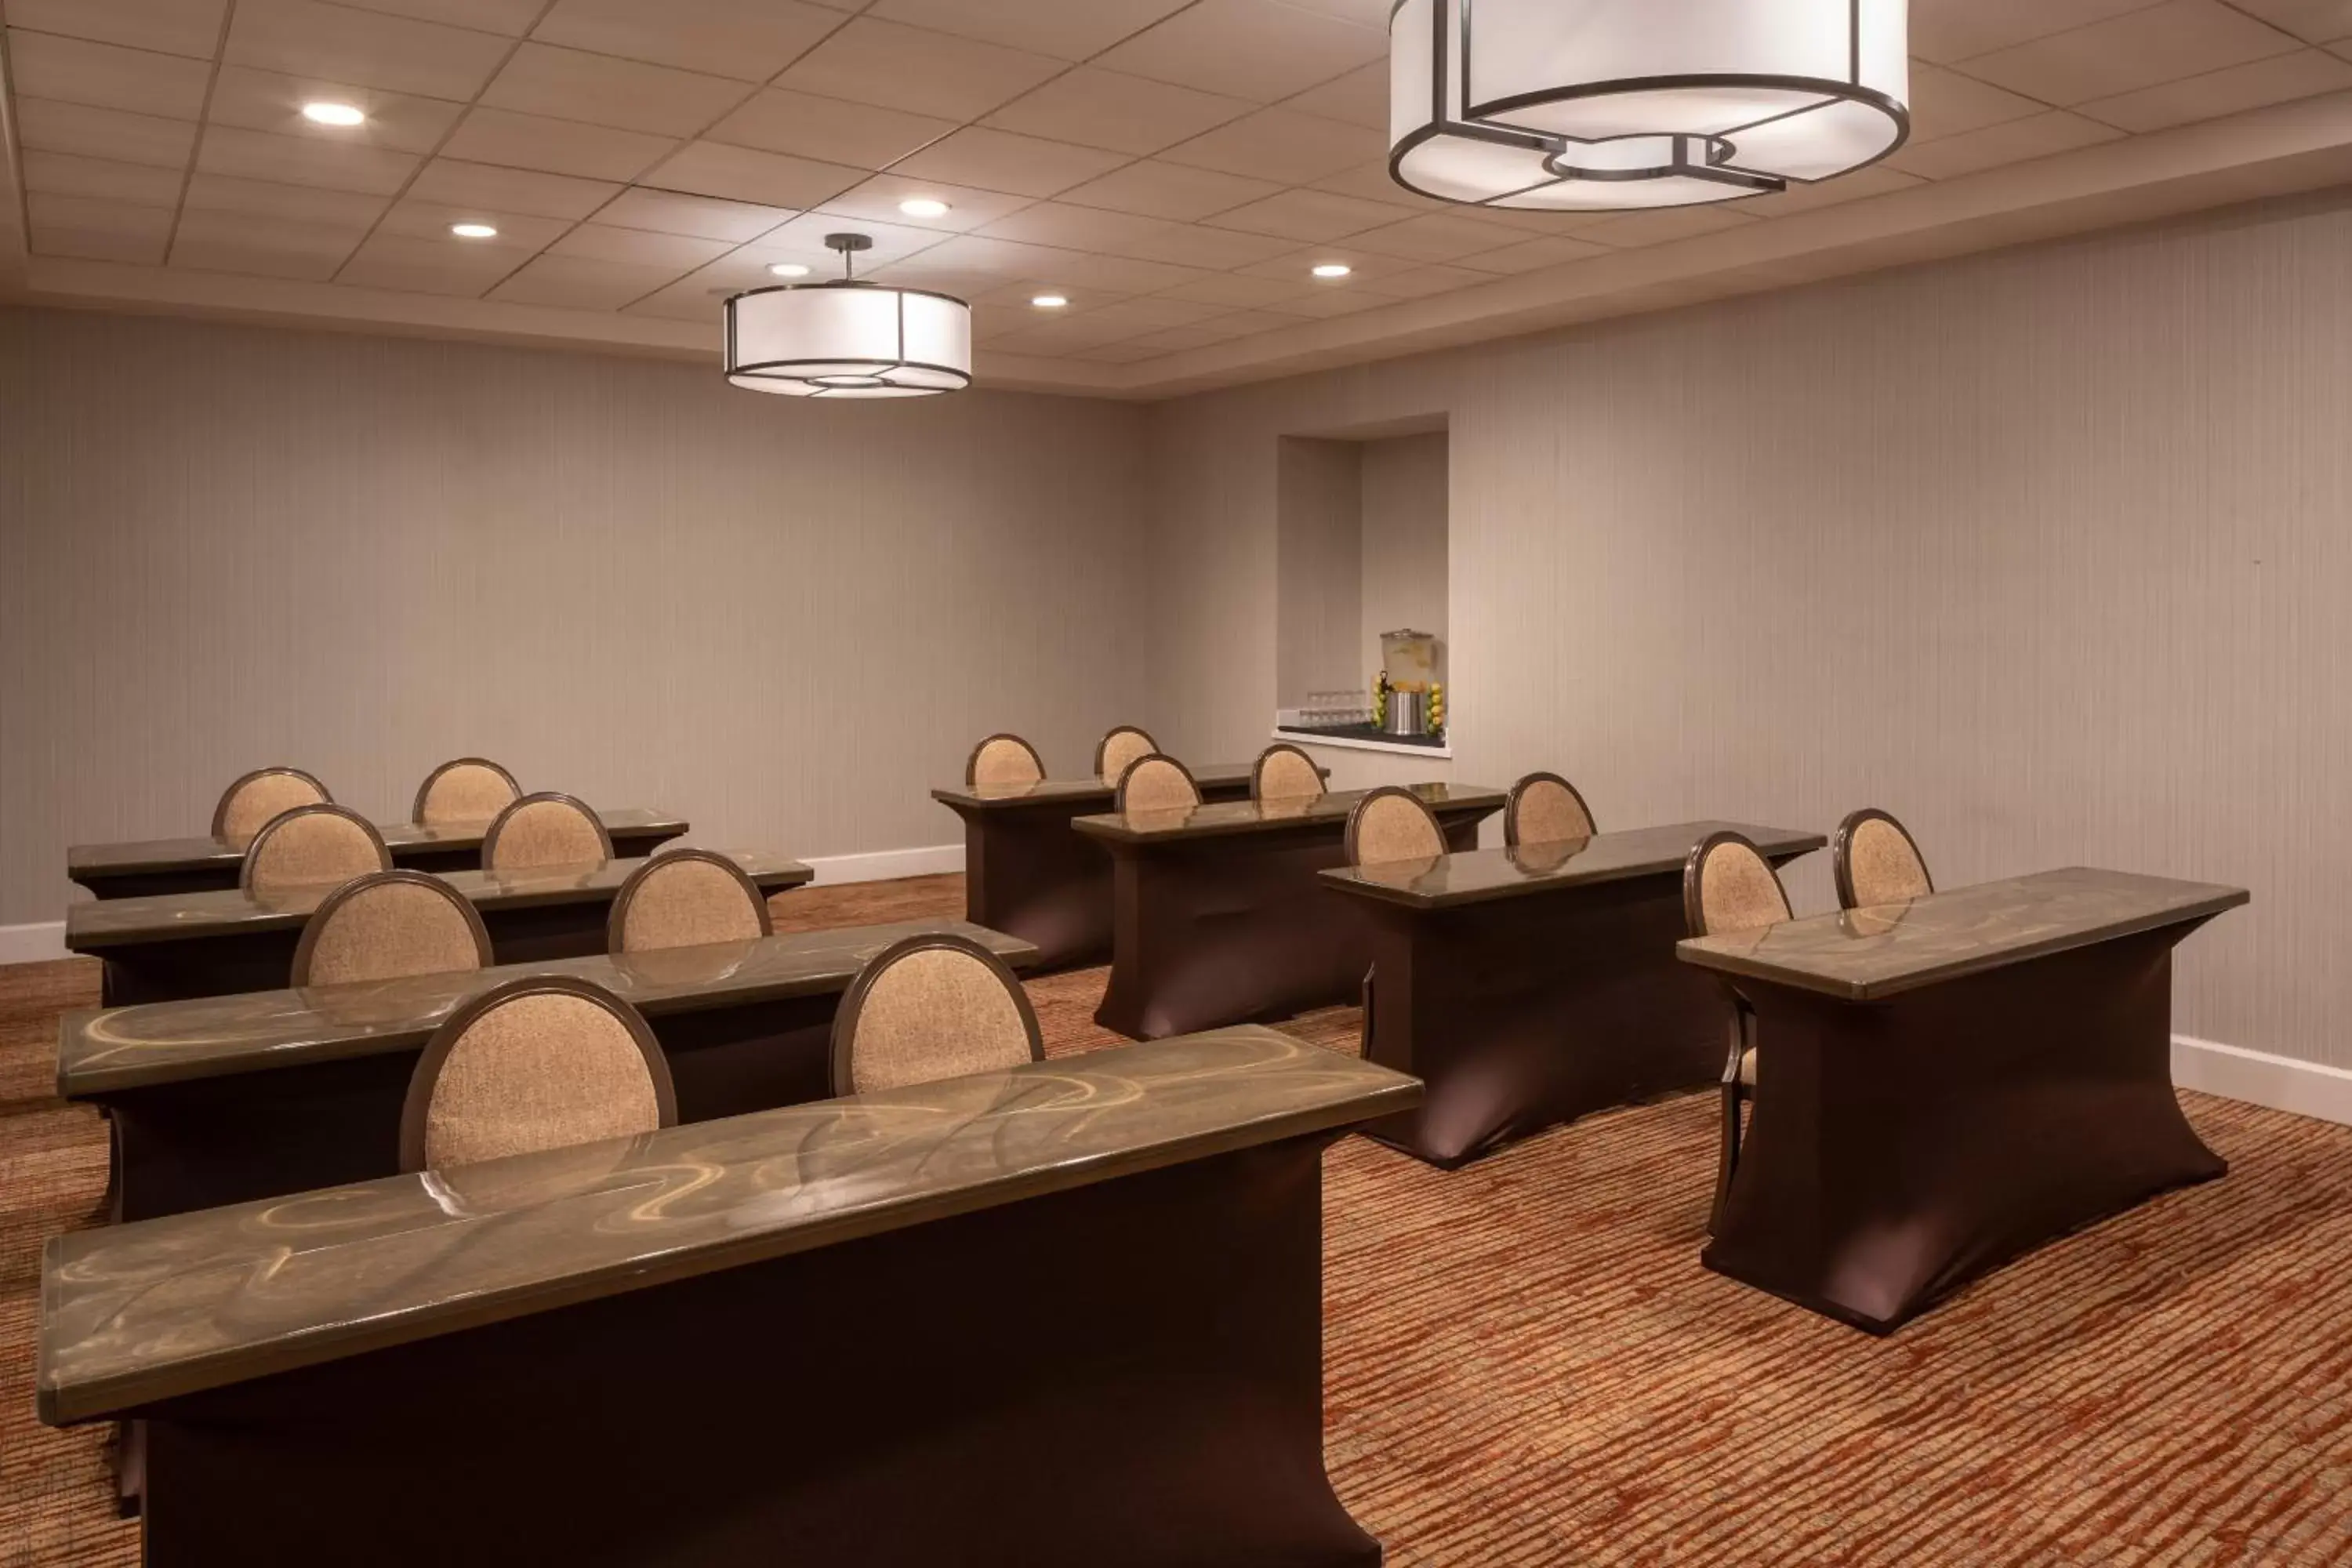 Meeting/conference room in Sheraton Dallas Hotel by the Galleria